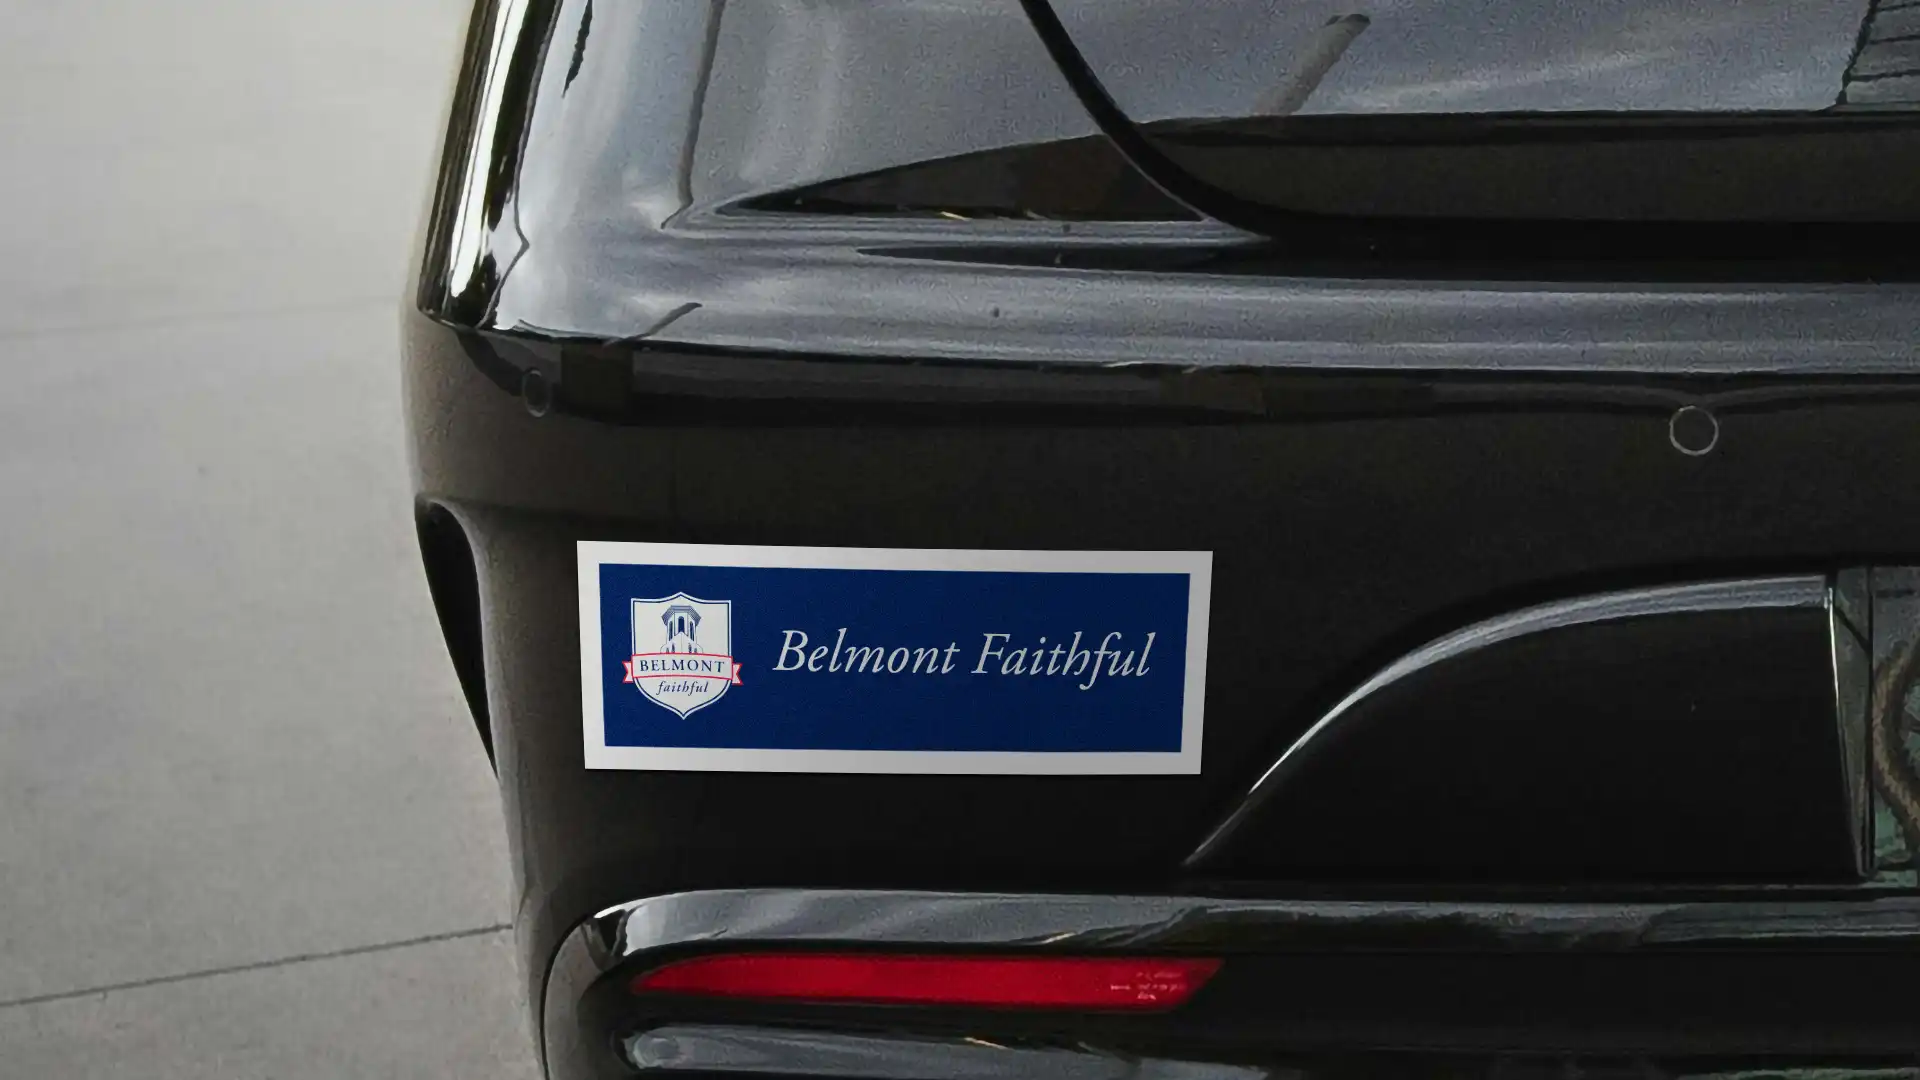 Bumper sticker on the back of a car reading "Belmont Faithful" with the Belmont University alumni fundraising campaign logo.